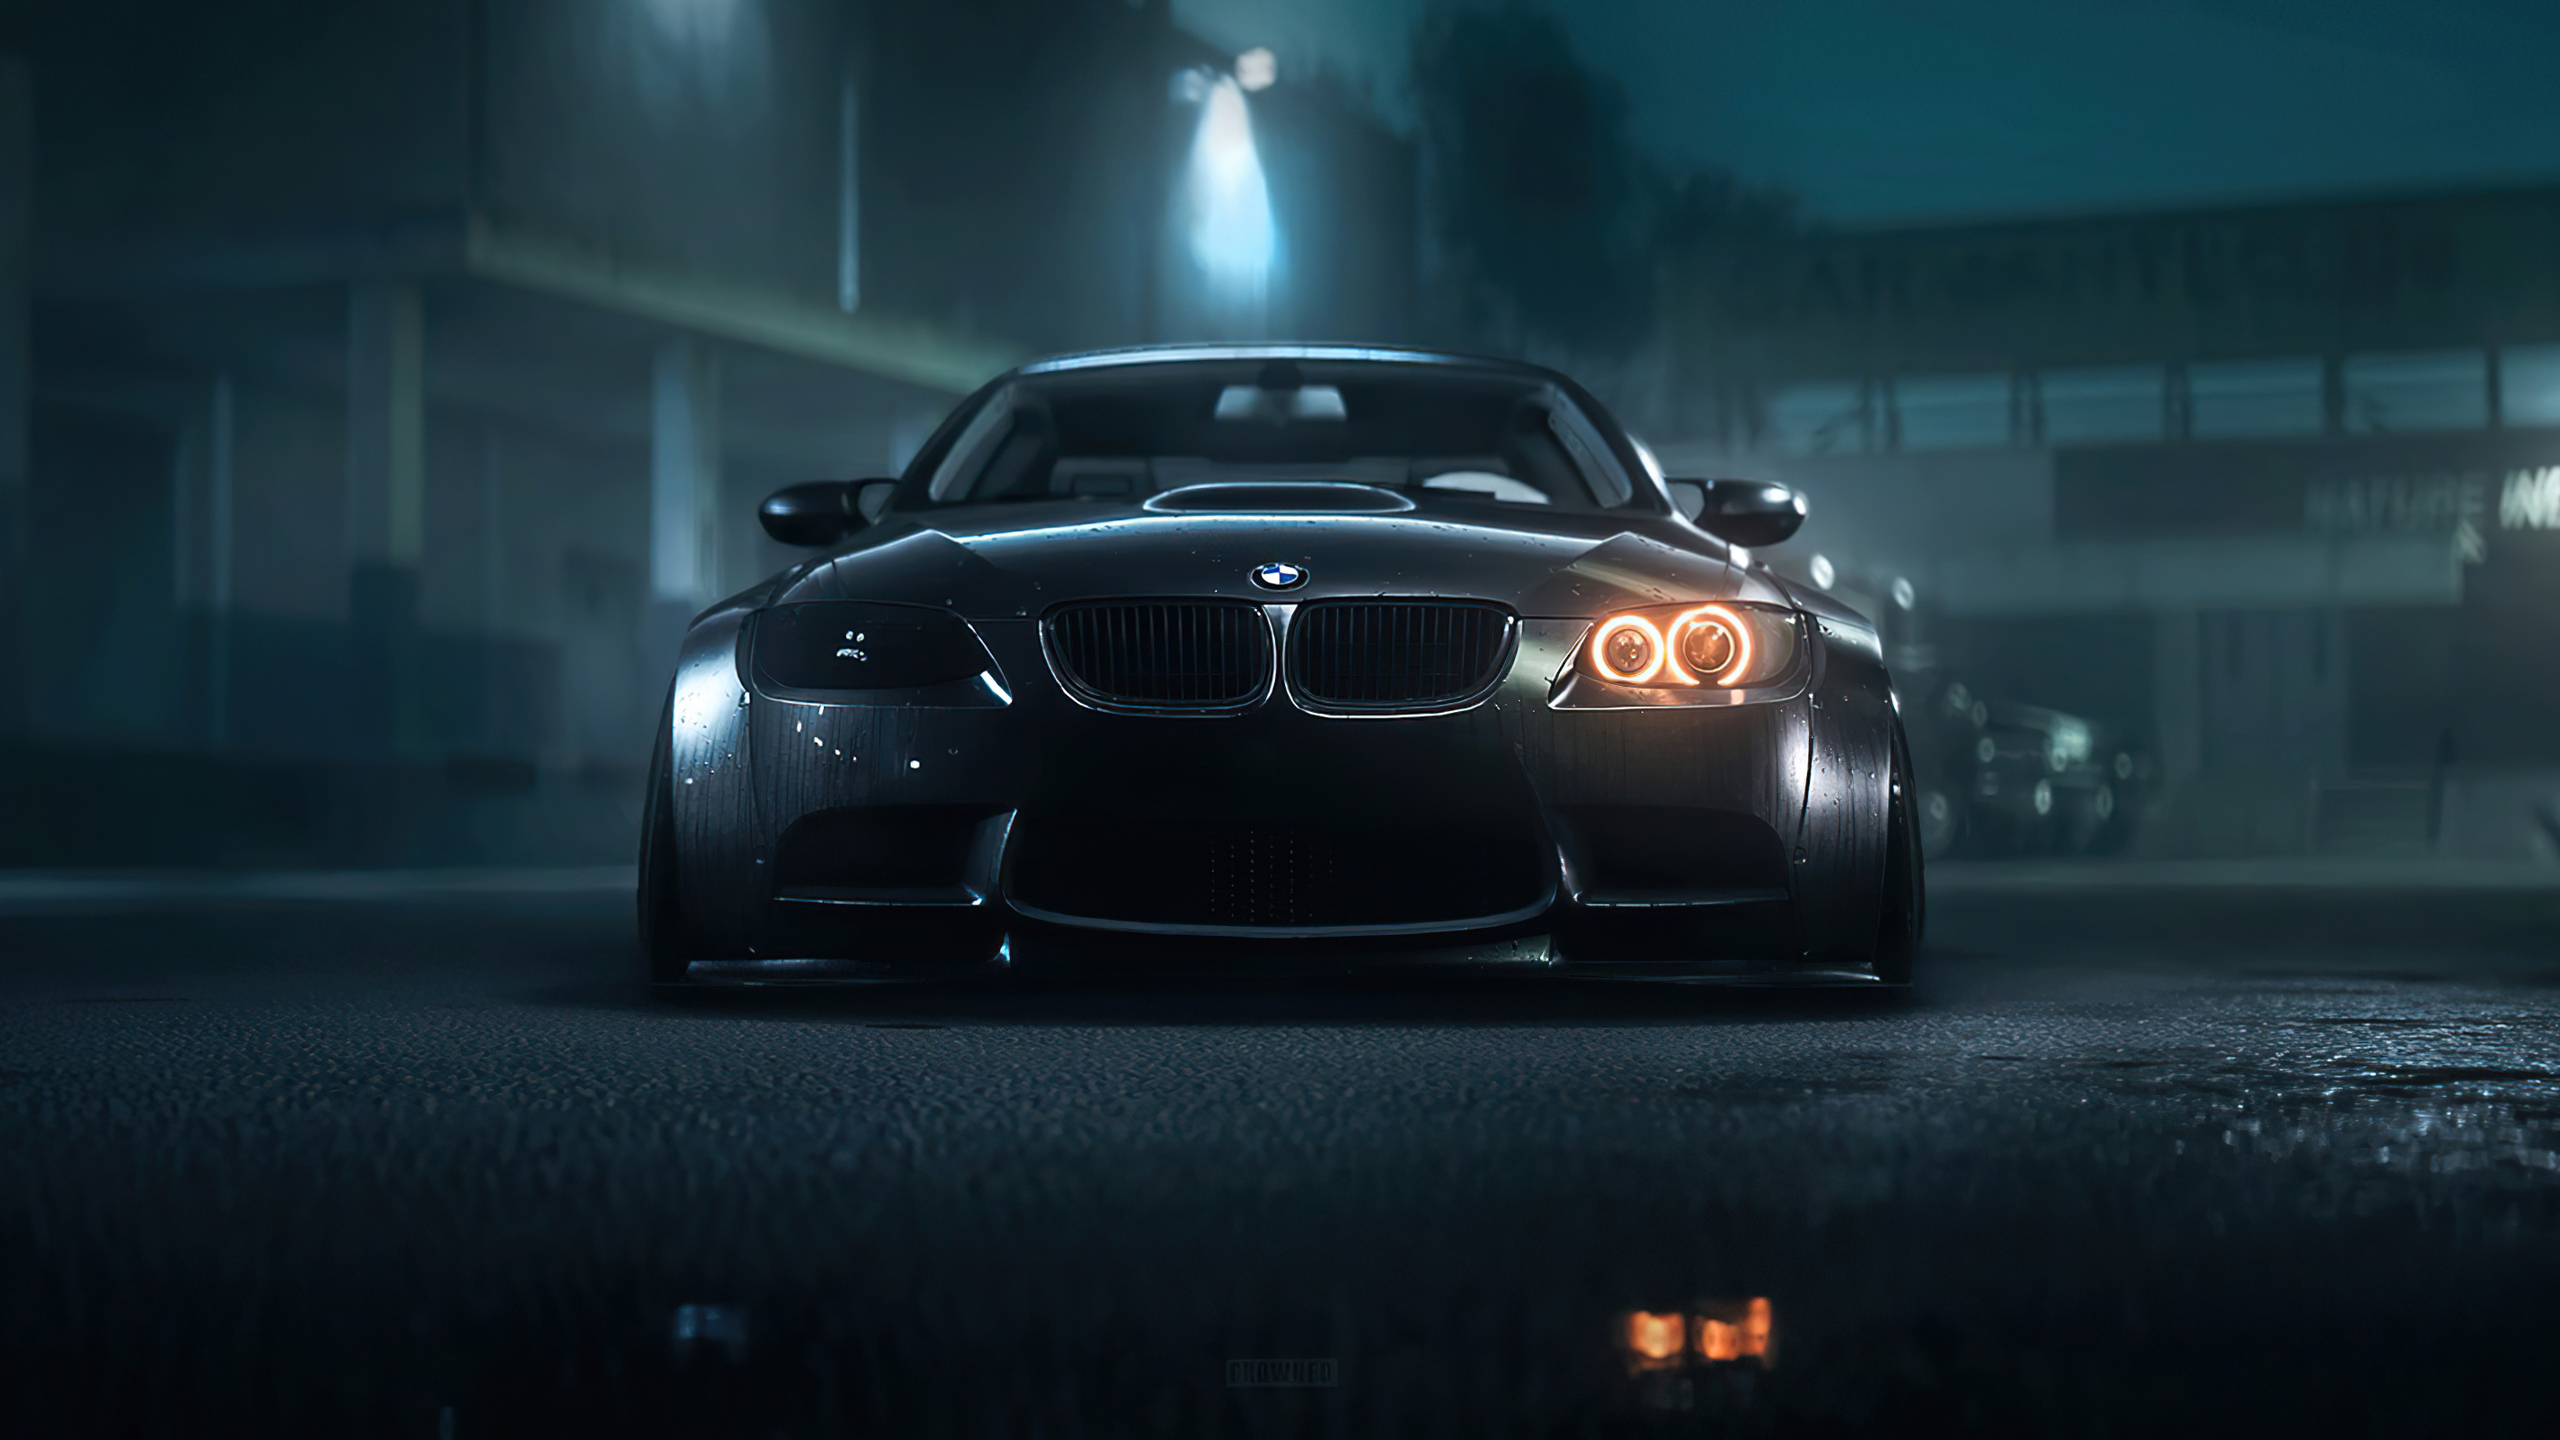 2560x1440 Bmw M Nfs 4k 1440p Resolution Hd 4k Wallpapers Images